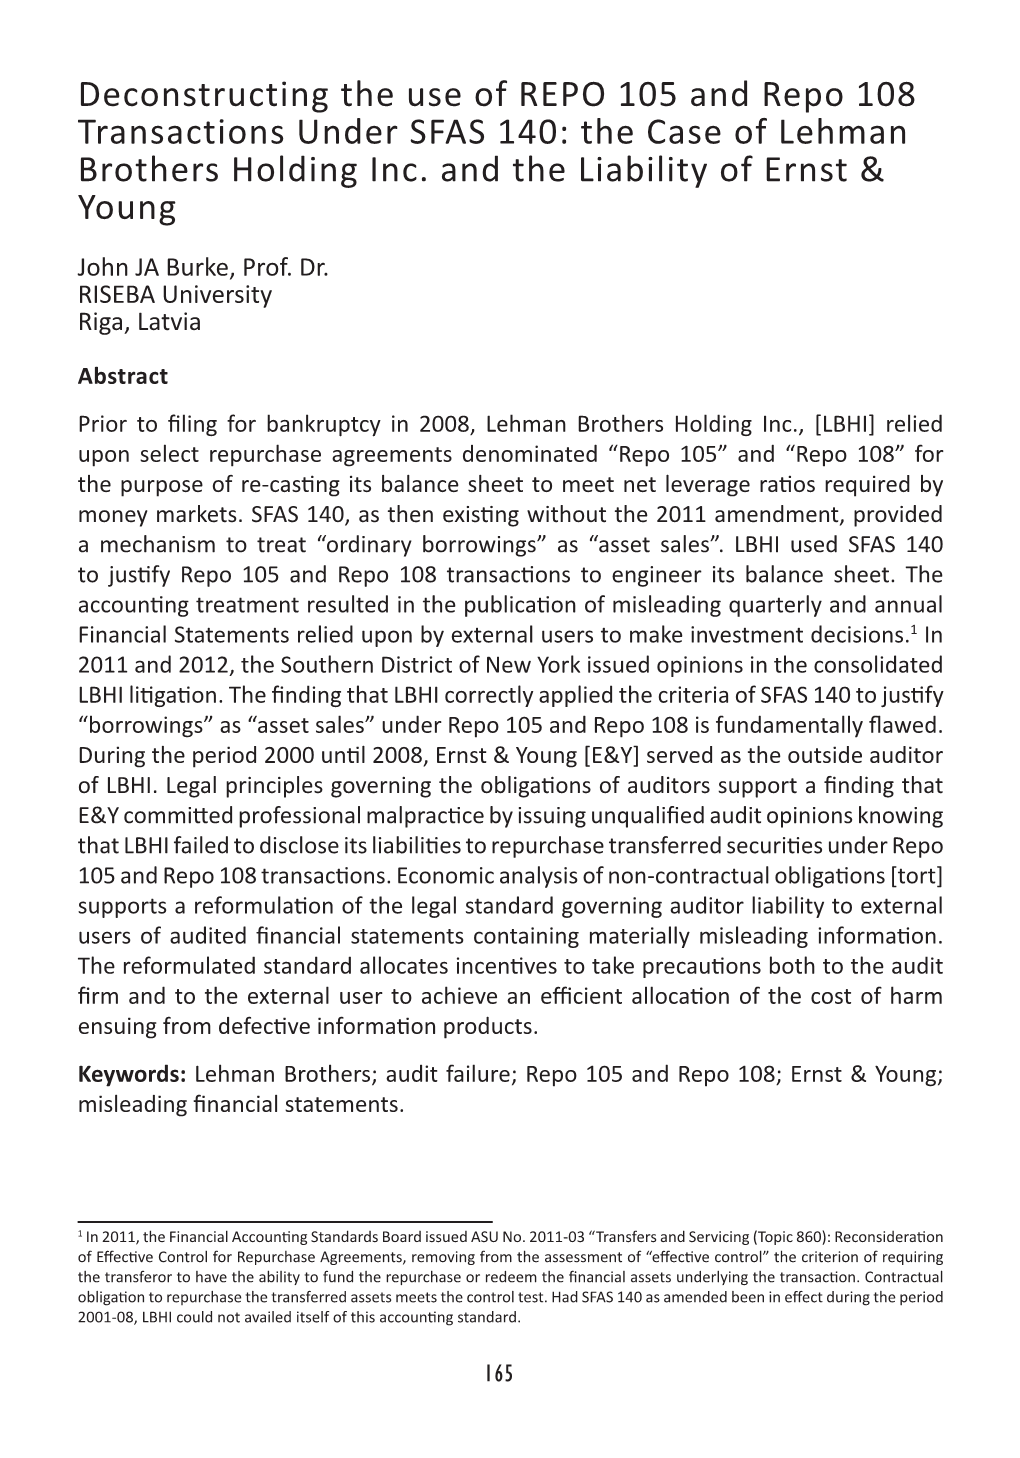 Deconstructing the Use of REPO 105 and Repo 108 Transactions Under SFAS 140: the Case of Lehman Brothers Holding Inc